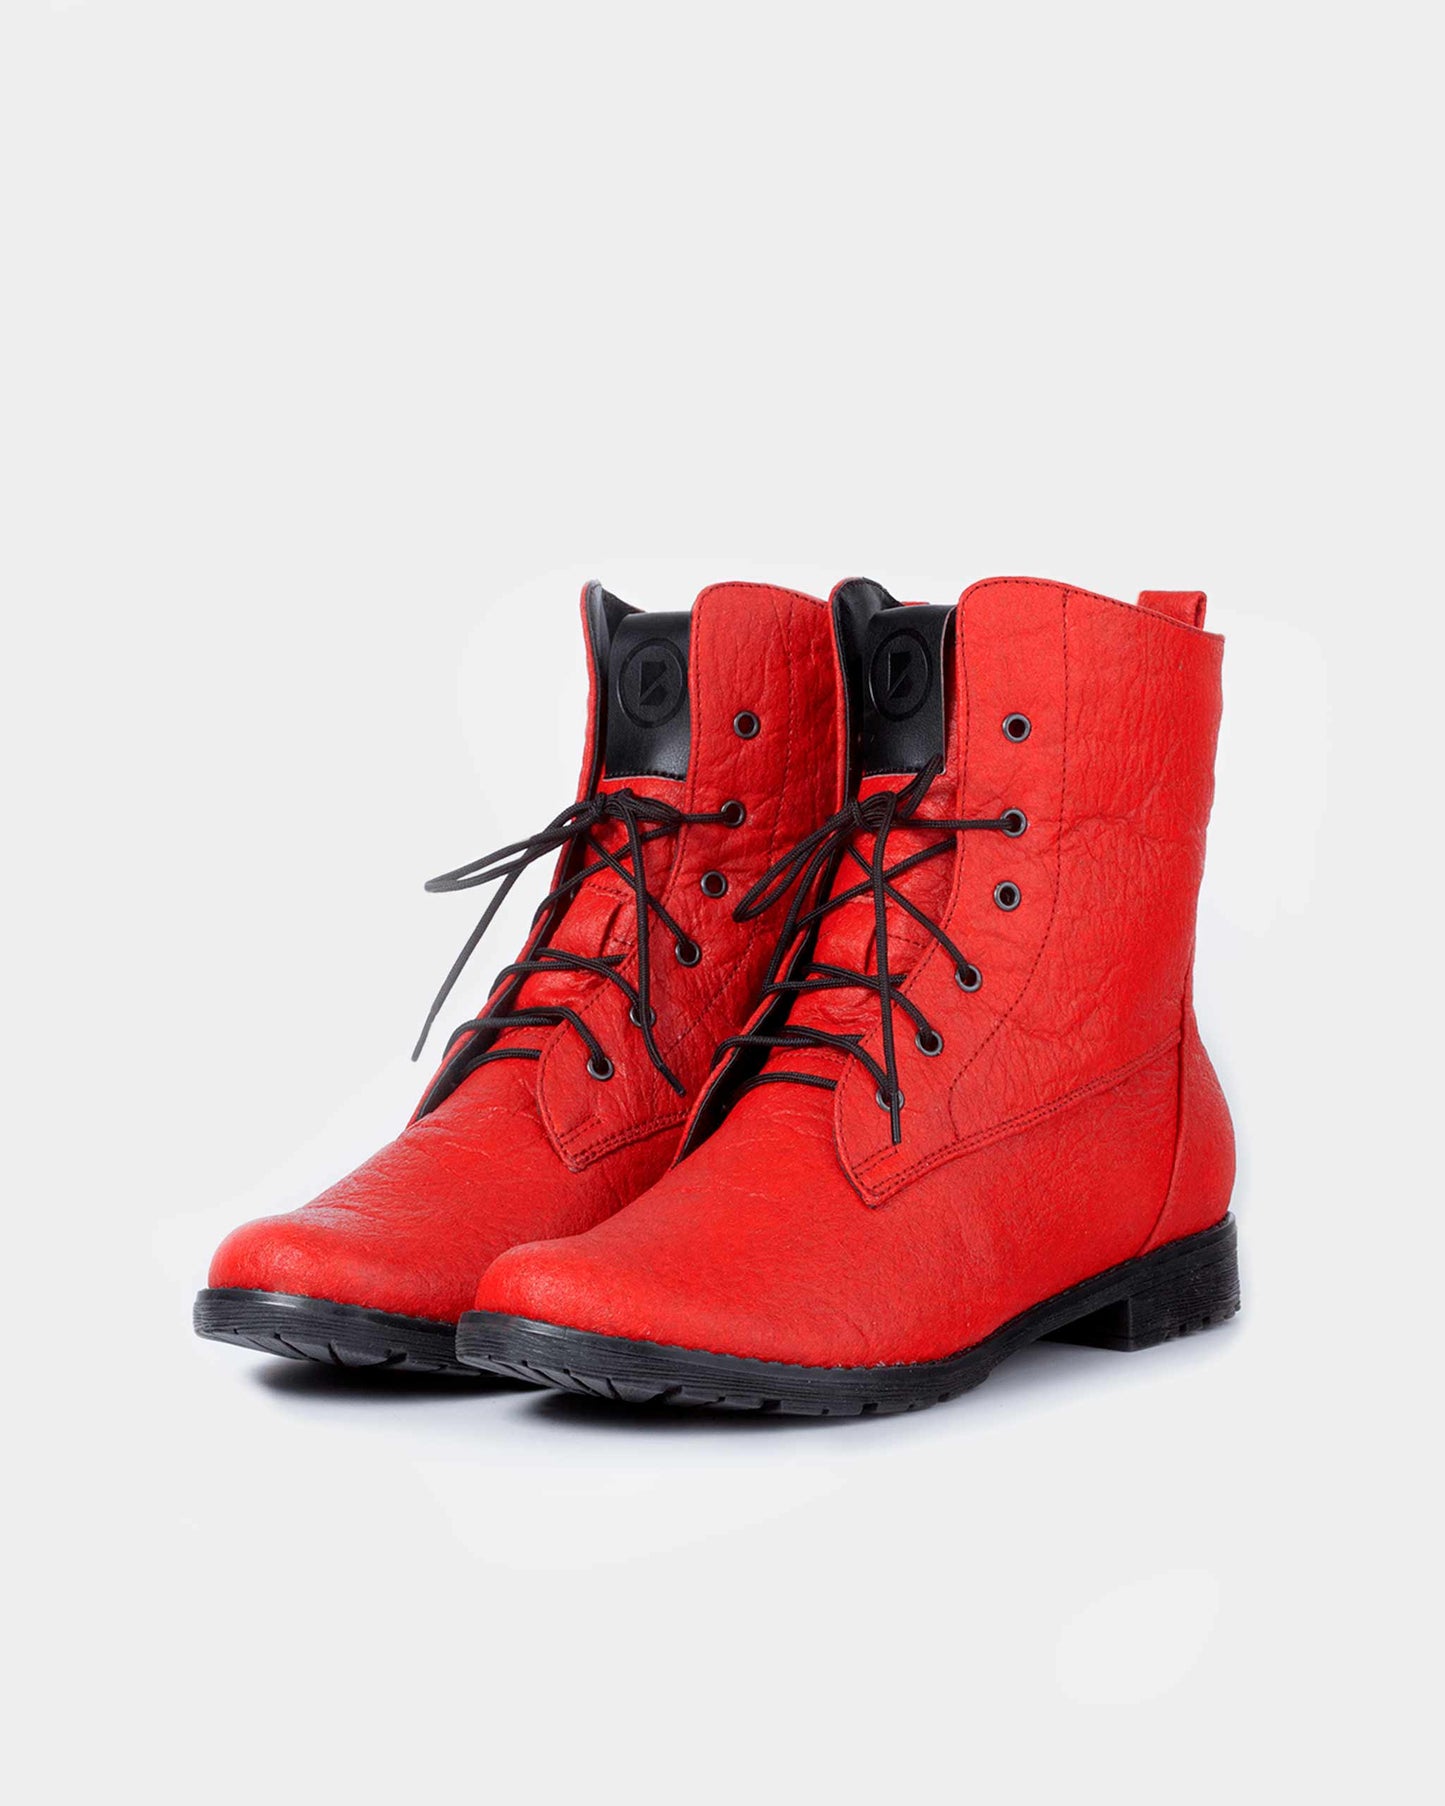 Workers No. 2 Paprika  Pina pineapple leather ankle boots - sample sale